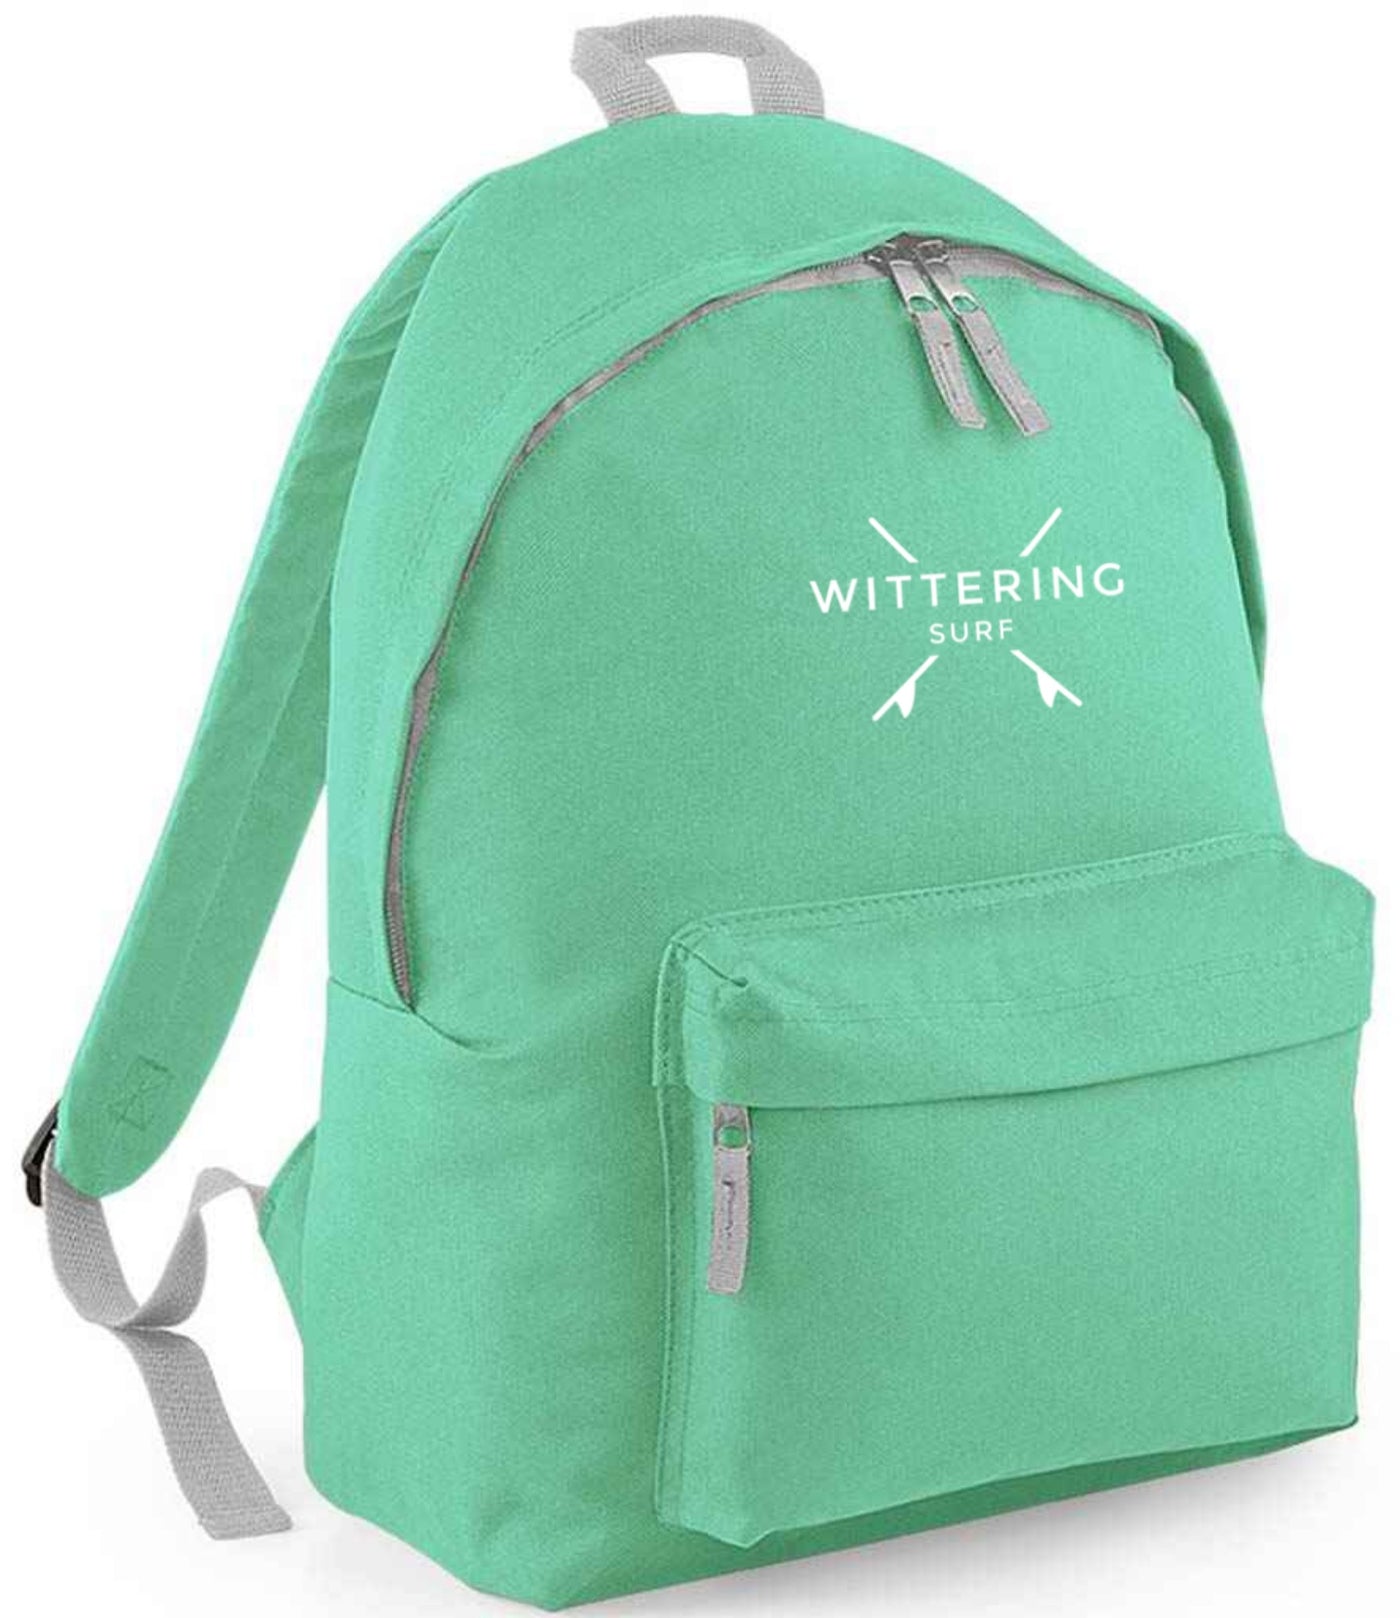 CAMPUS BACKPACK - MINT GREEN/GREY